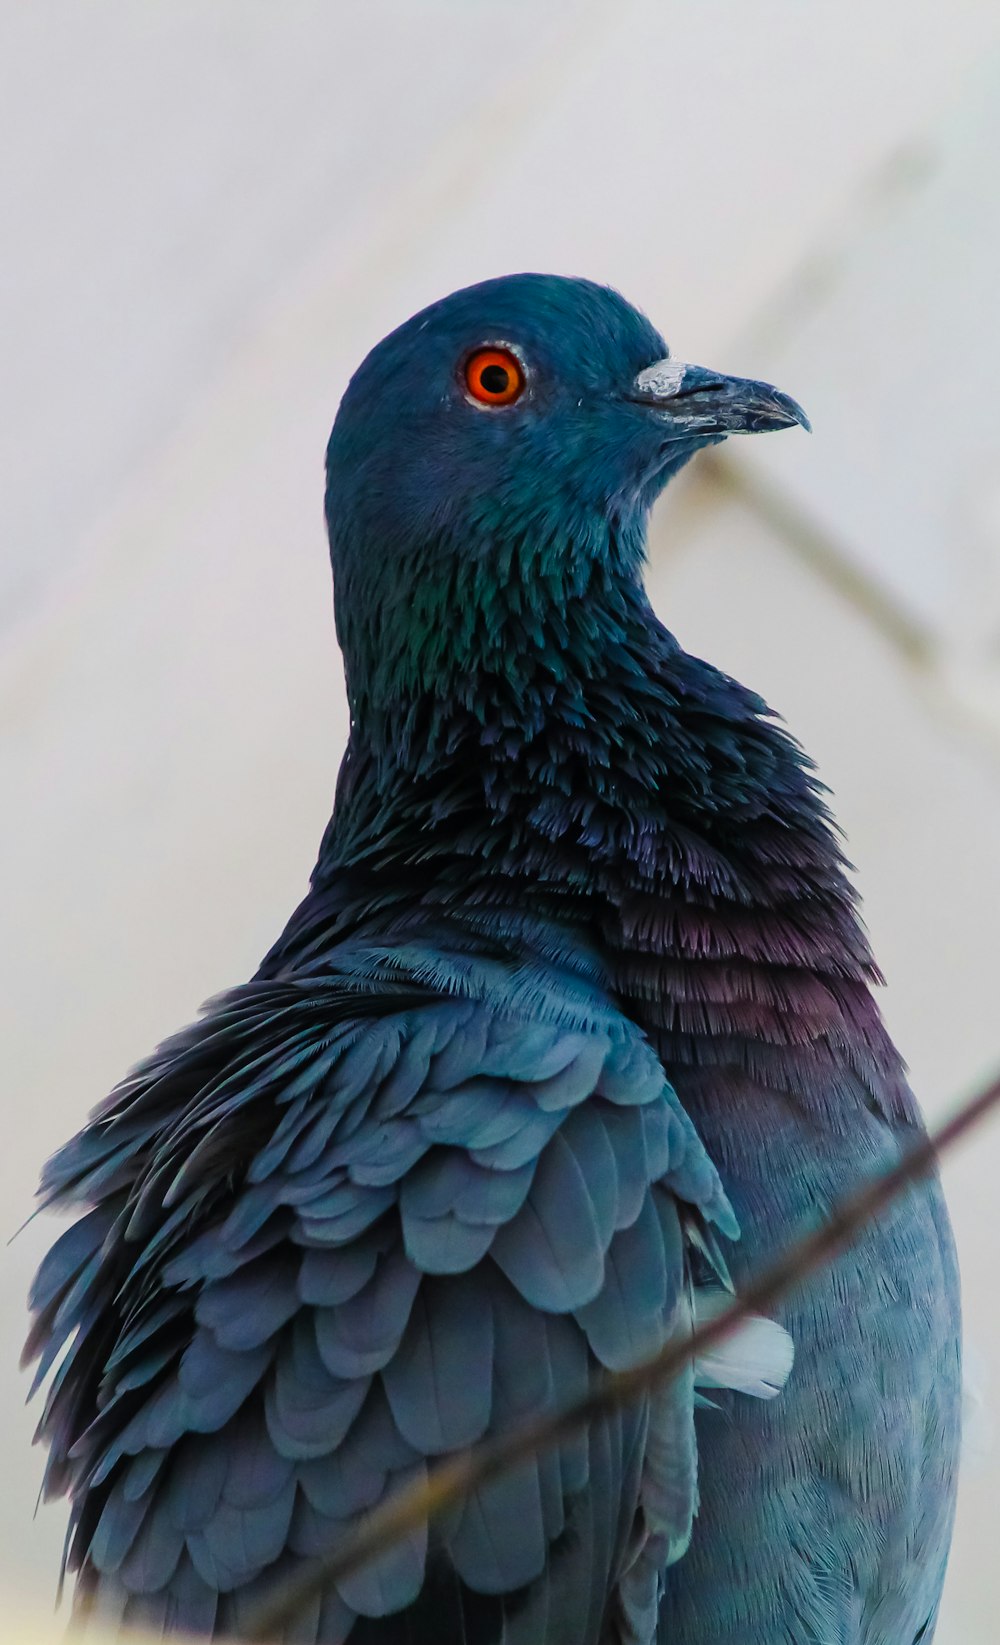 black and blue bird in close up photography